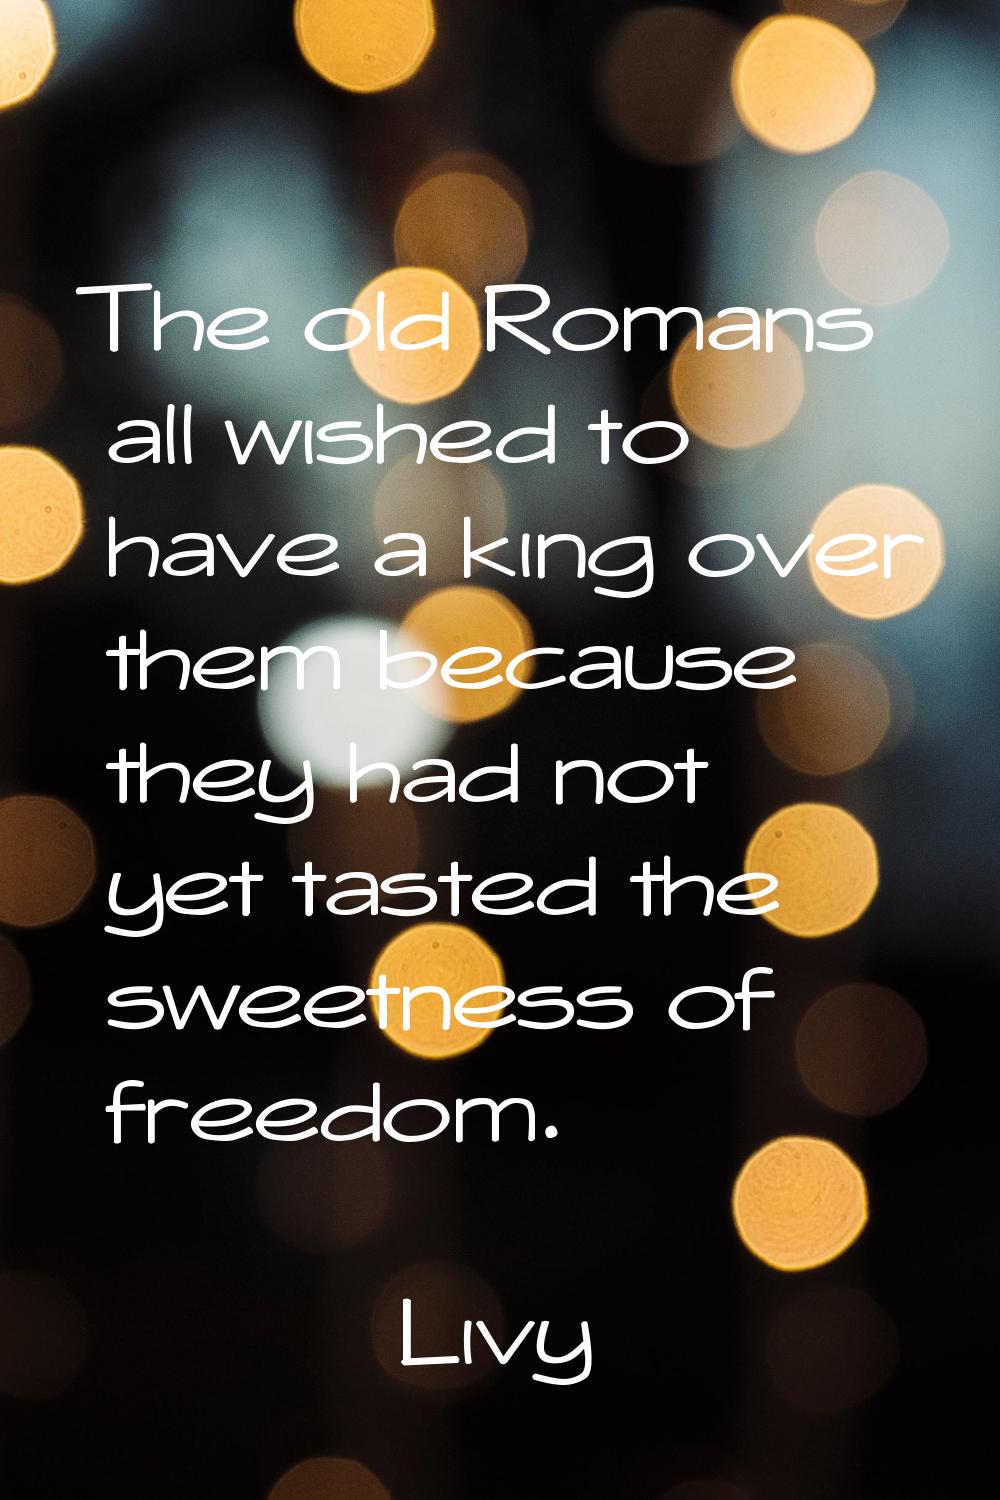 The old Romans all wished to have a king over them because they had not yet tasted the sweetness of